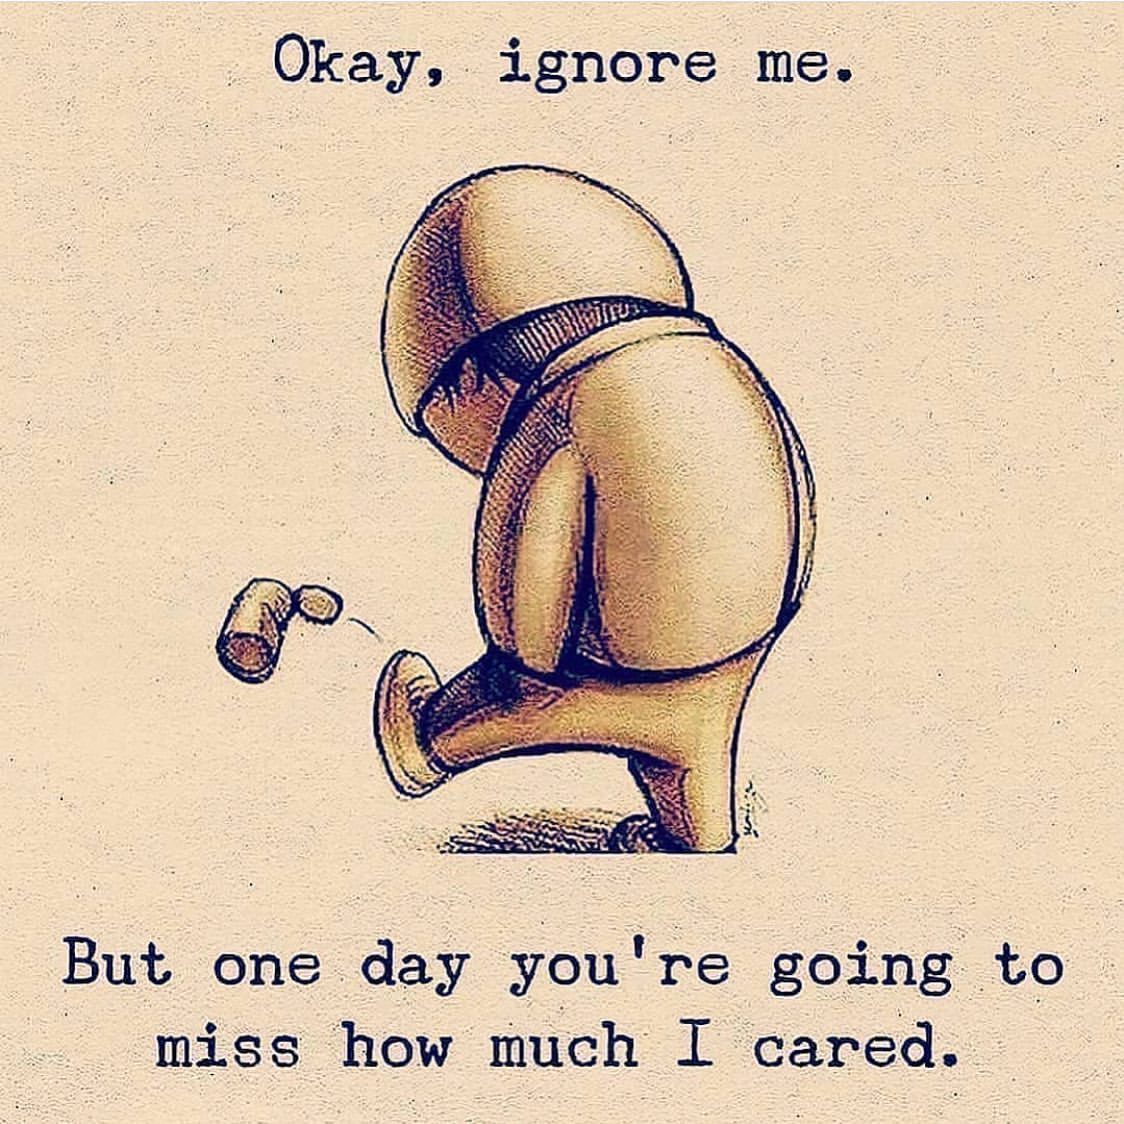 Okay, ignore me. But one day you're going to miss how much I cared.